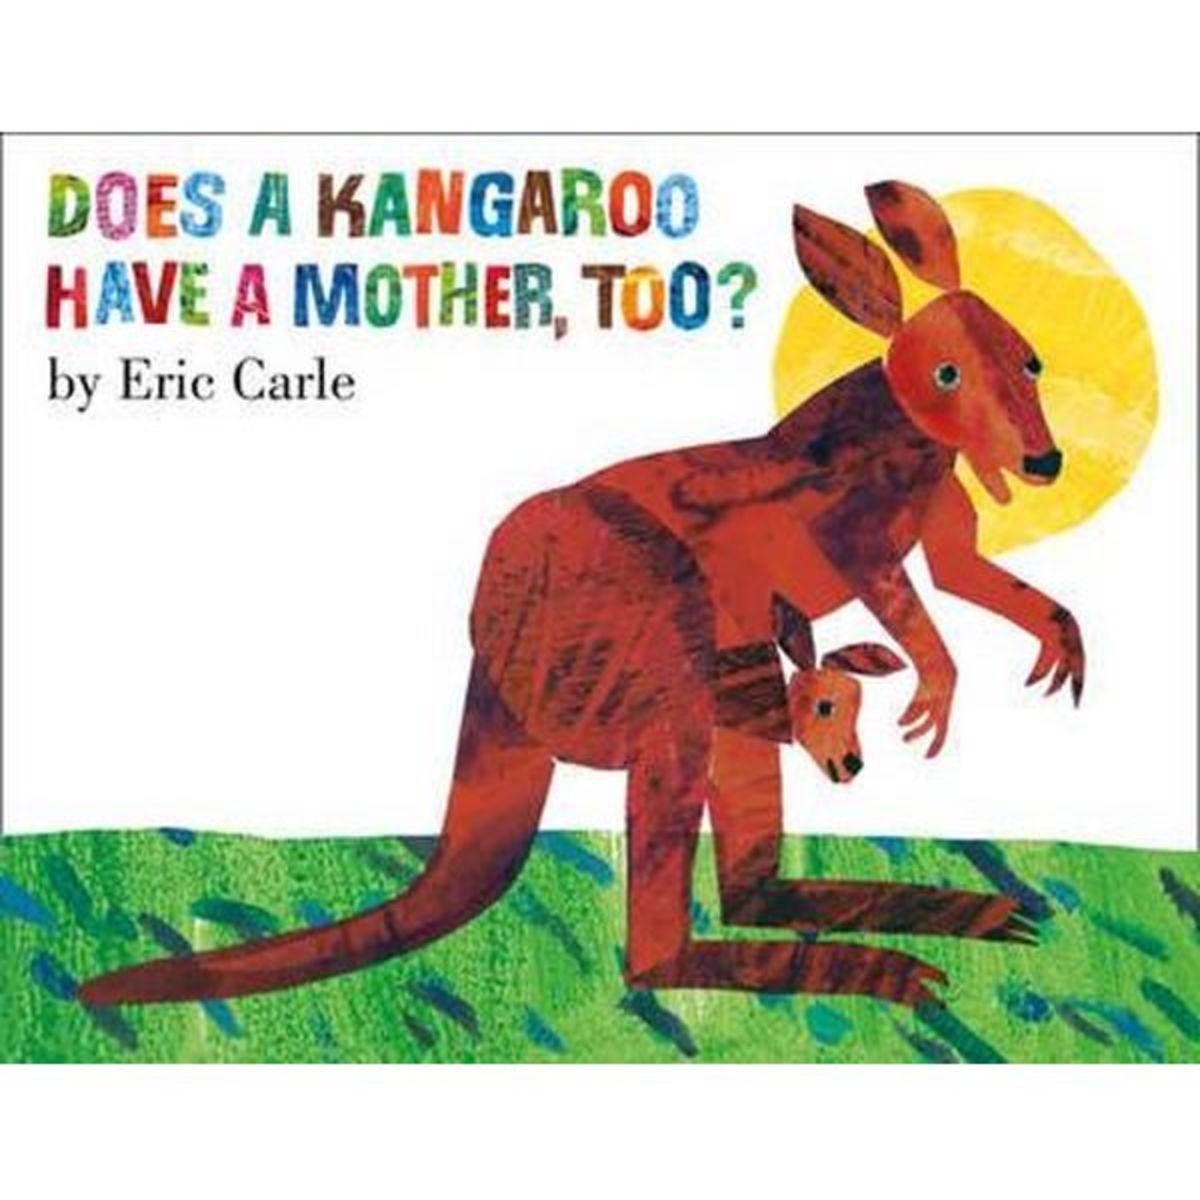 Does A Kangaroo Have A Mother Too? by Eric Carle